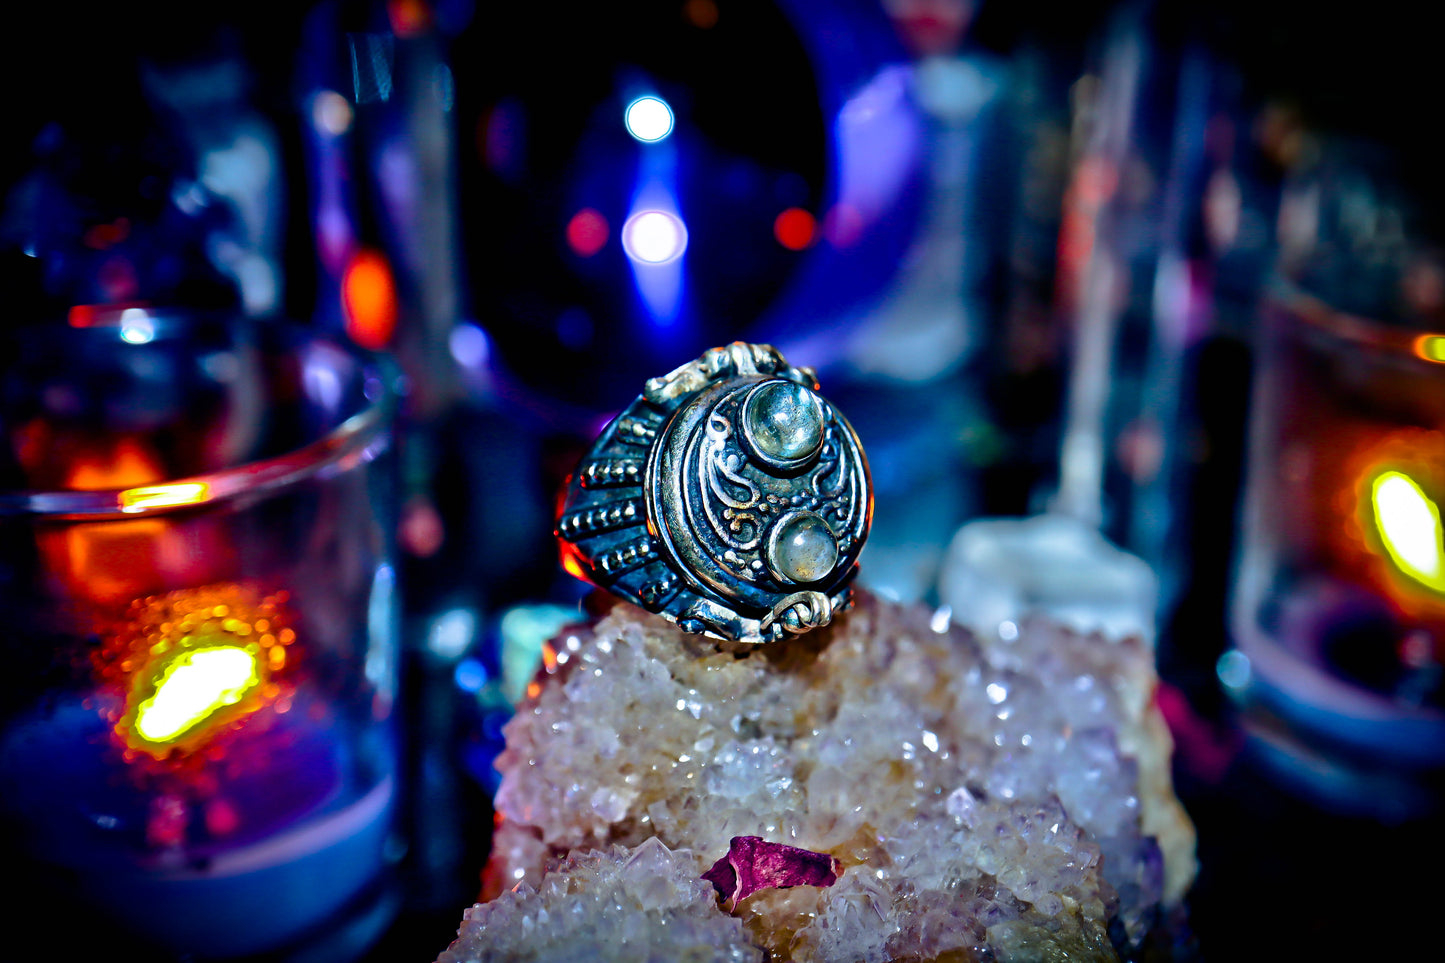 MASTER HIGH FREQUENCY Secret Society Poison Ring Haunted 333 Magick Spells & Magickal Power! $$ Occult Secrets $$ AMAZING! Poison Ring w/ Hidden Compartment! * 925 Sterling Silver!